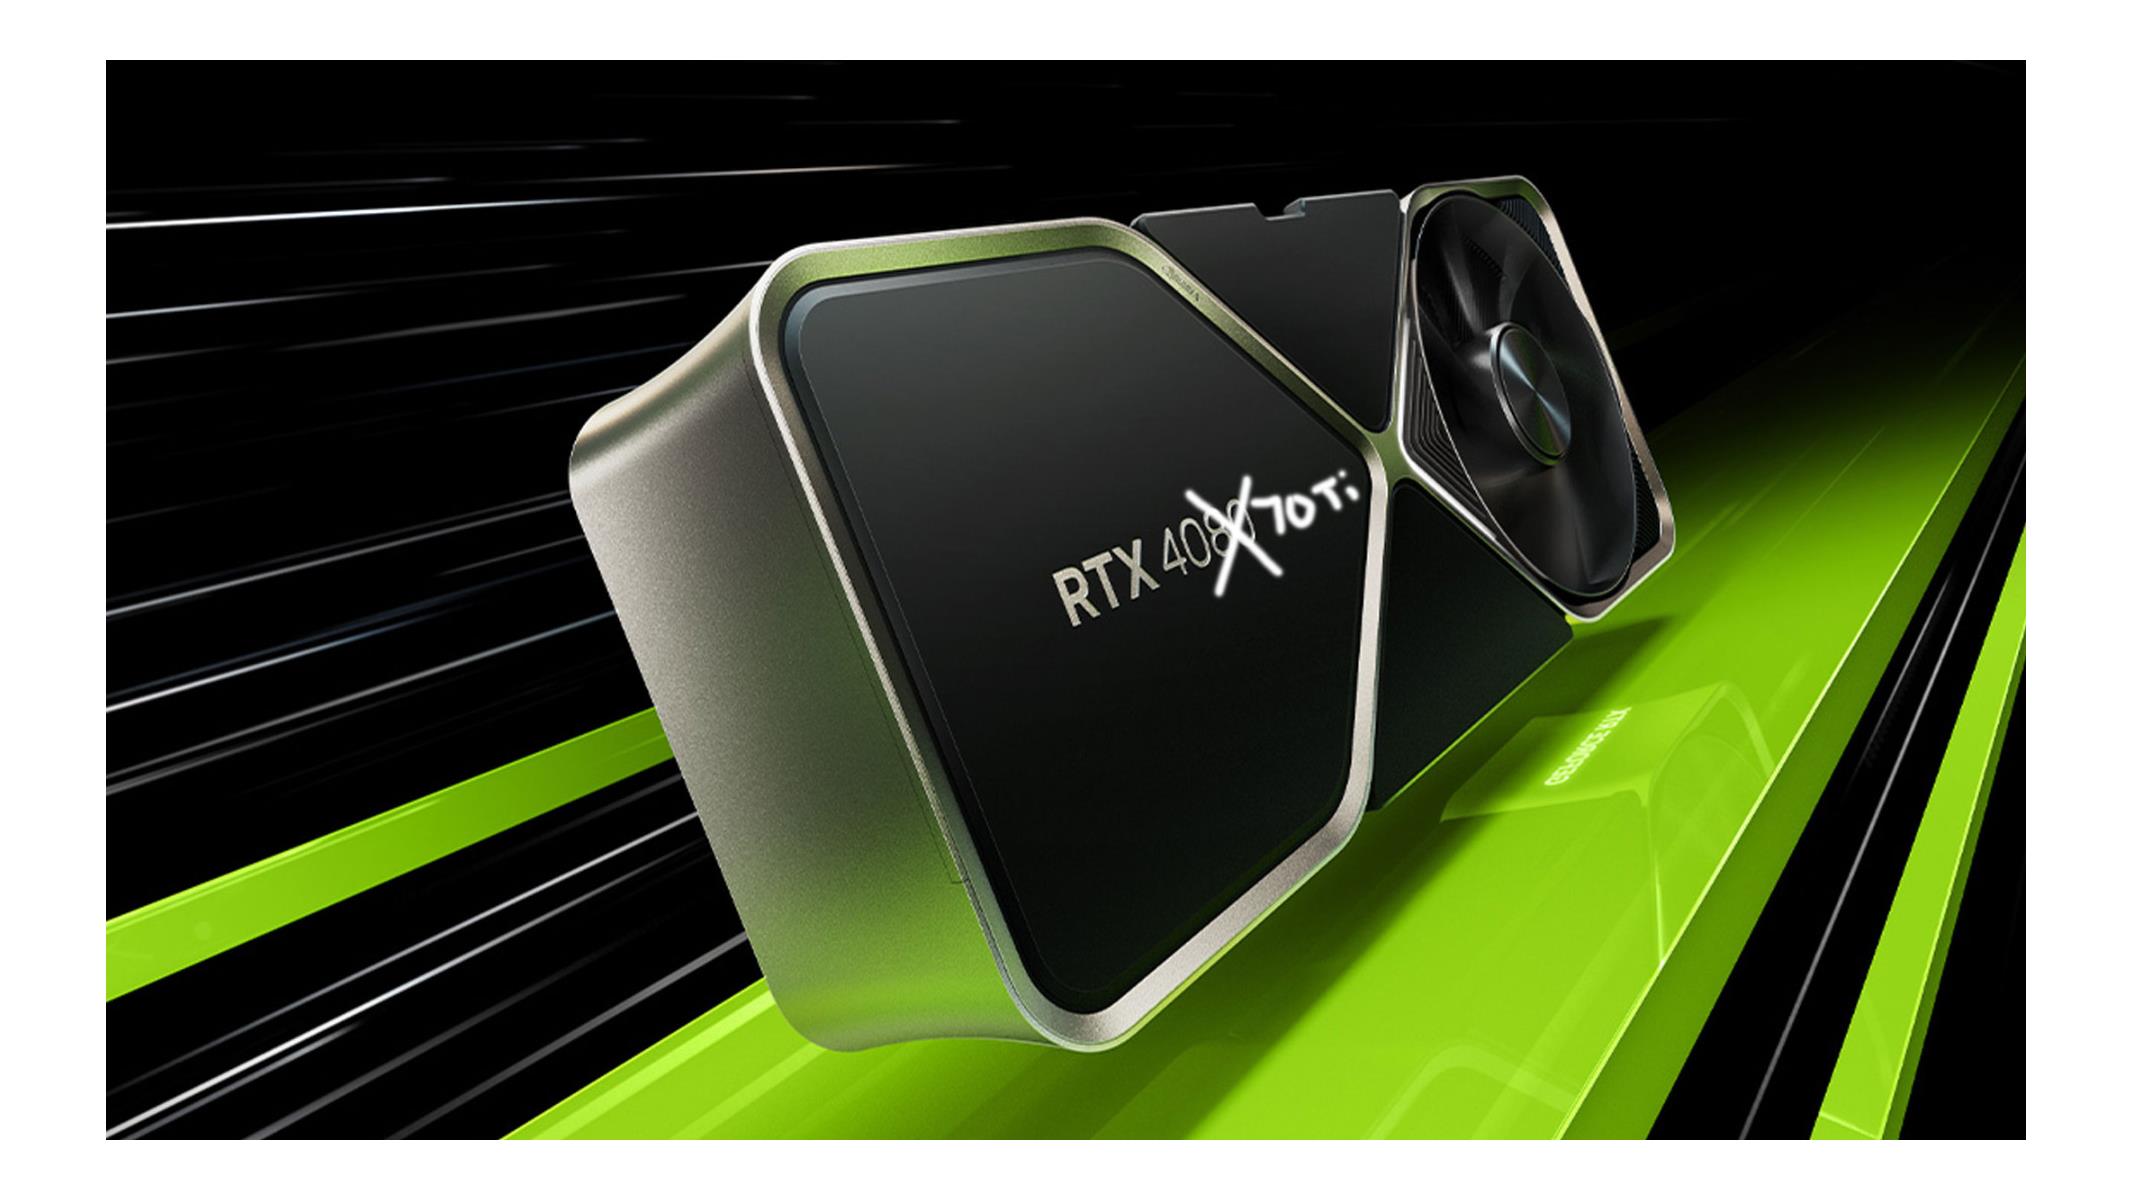 Nvidia's canceled 12GB RTX 4080 reportedly returning as RTX 4070